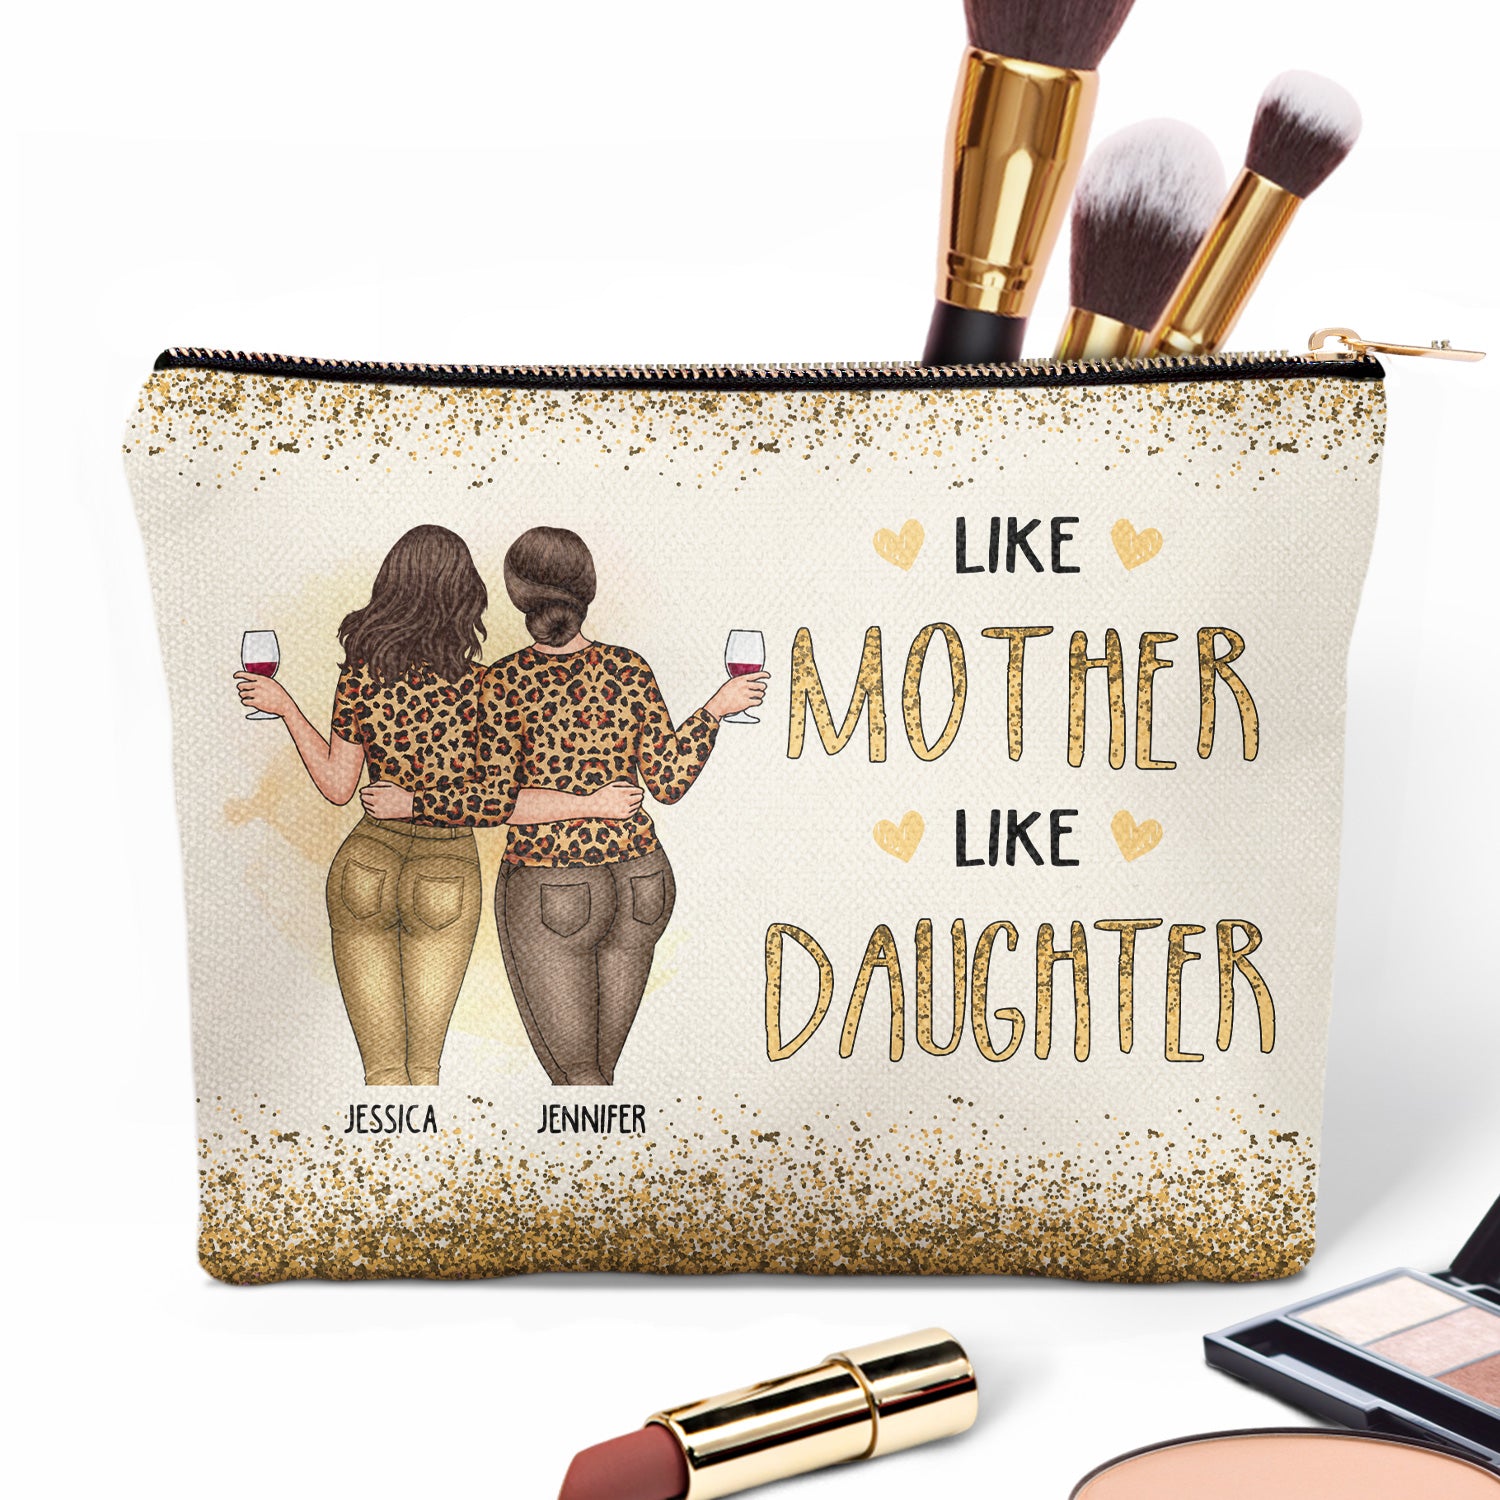 Like Mother Like Daughter - Gift For Mom, Mother - Personalized Cosmetic Bag